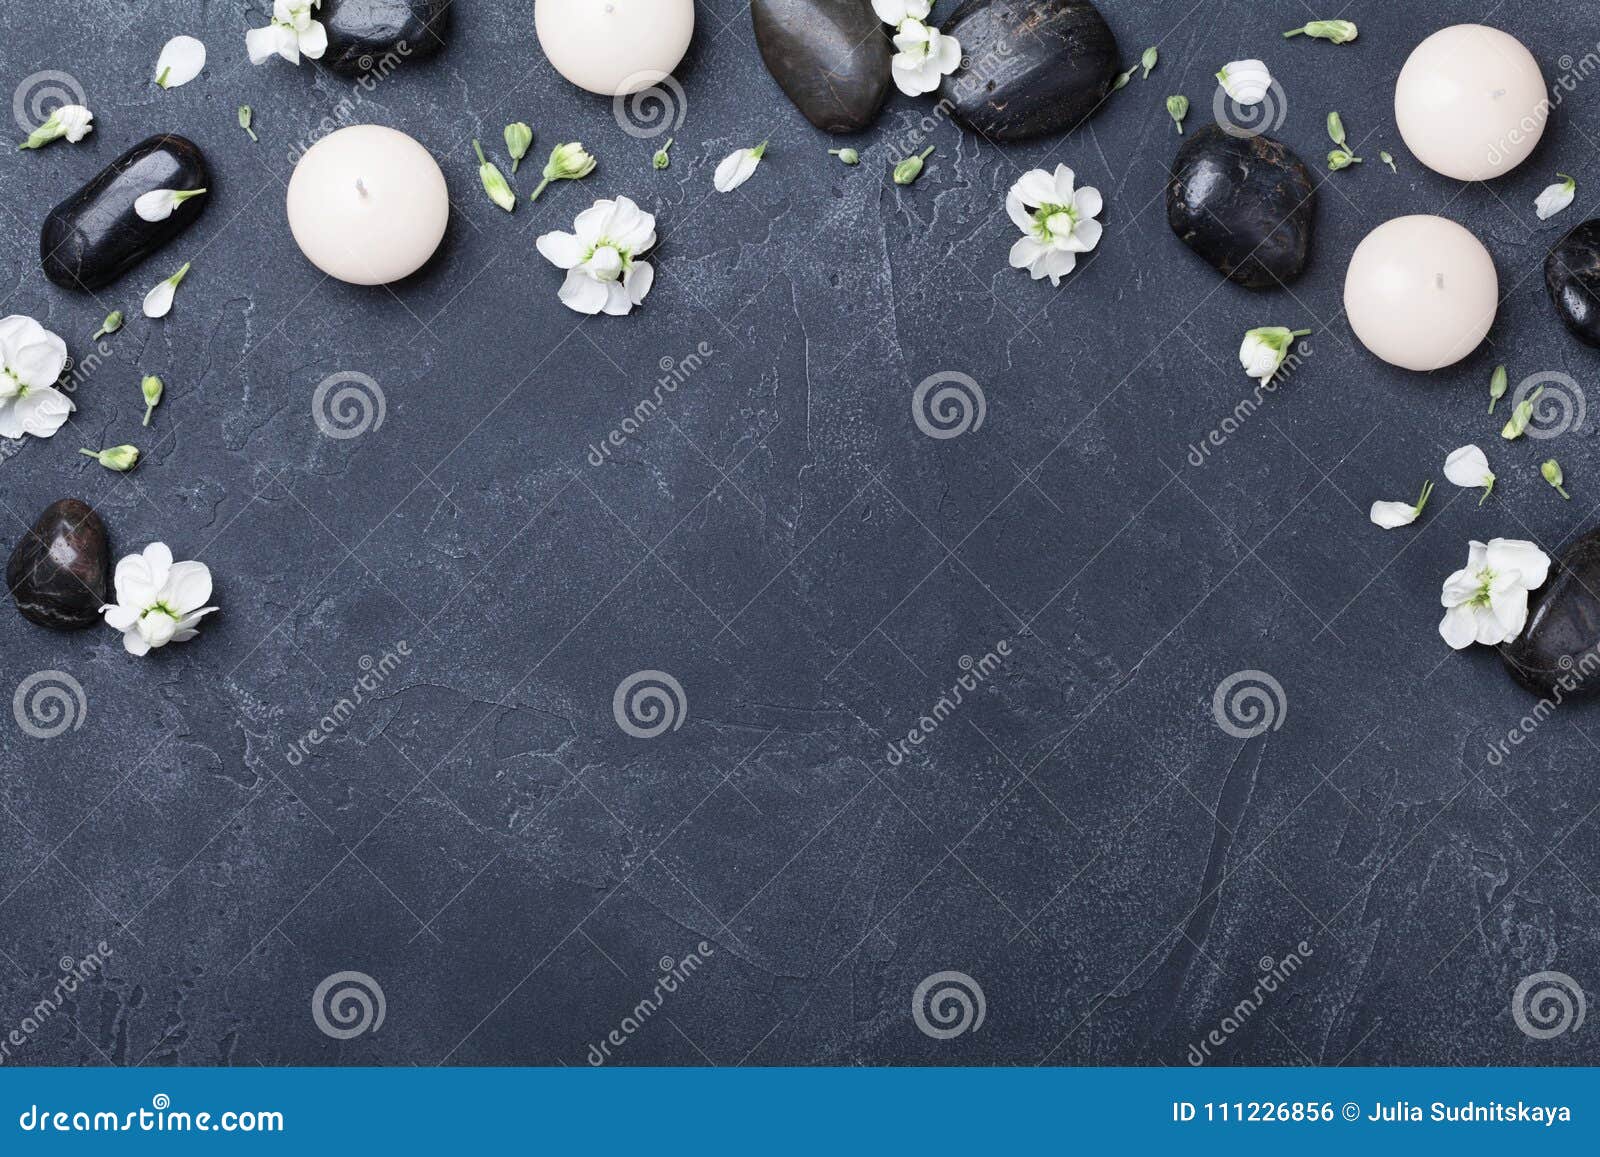 aromatherapy and spa composition decorated flowers on black stone background top view. beauty treatment and relaxation concept.